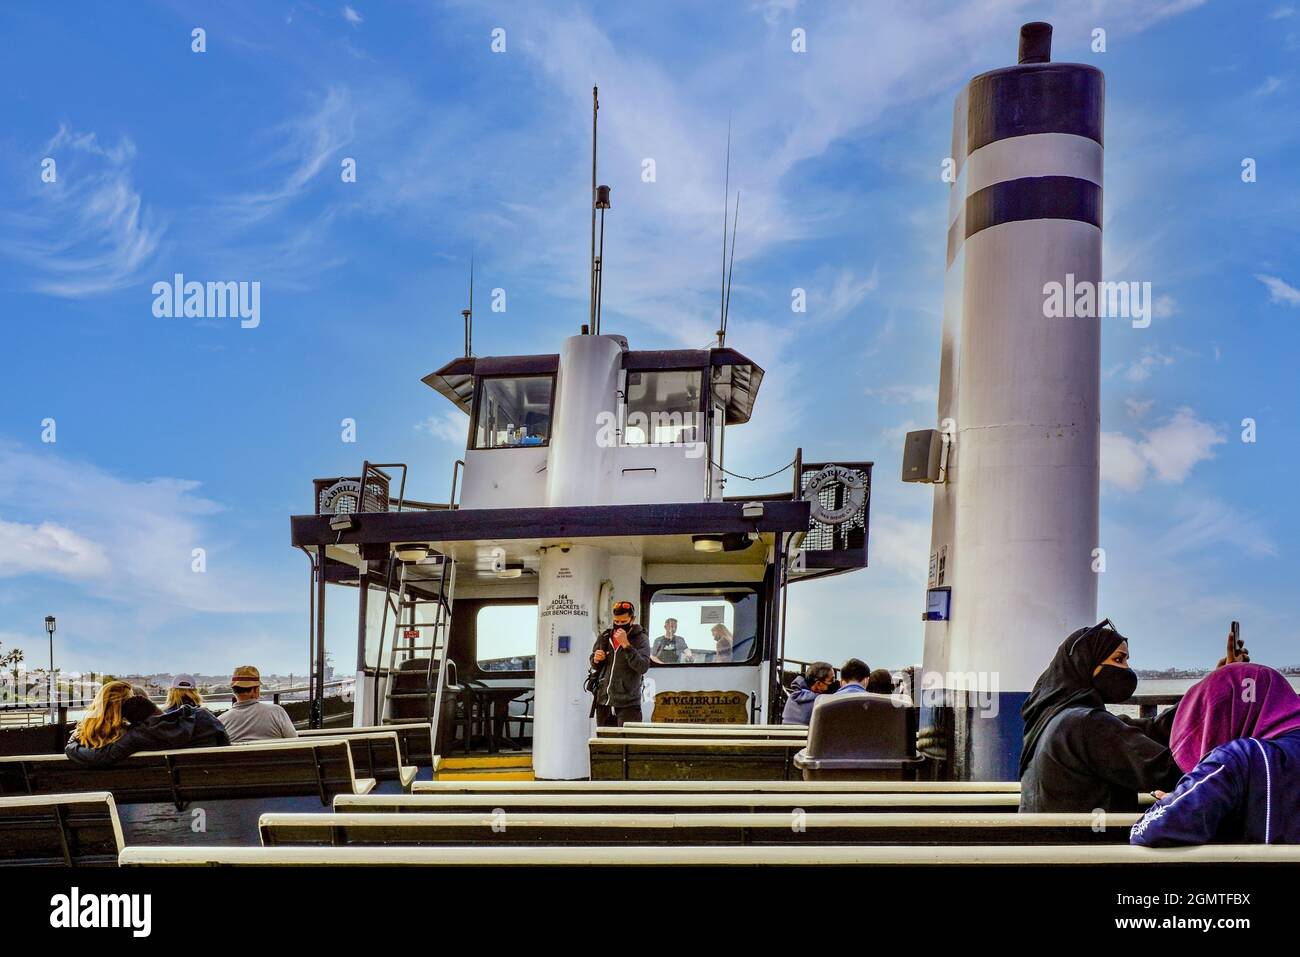 Oversized funnel for exhaust gases dominates the deck with passengers on the Cabrillo Ferry boat crossing the San Diego Bay from Coronado Island, CA Stock Photo